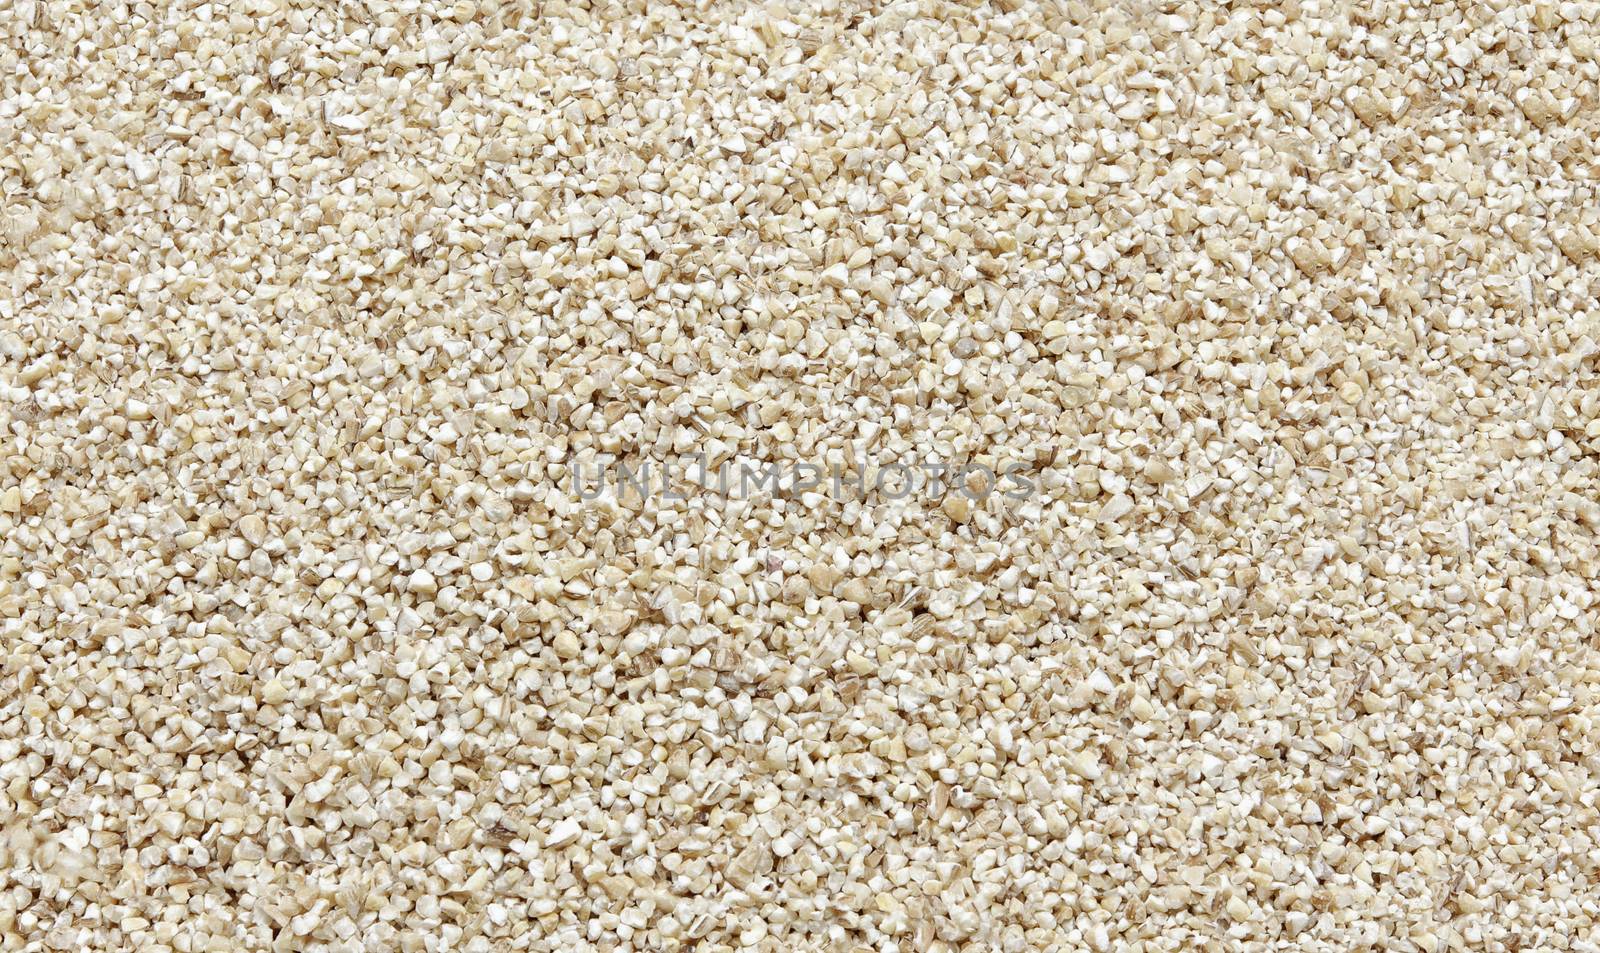 Crushed pearled barley -texture and details - traditional food by Studia72